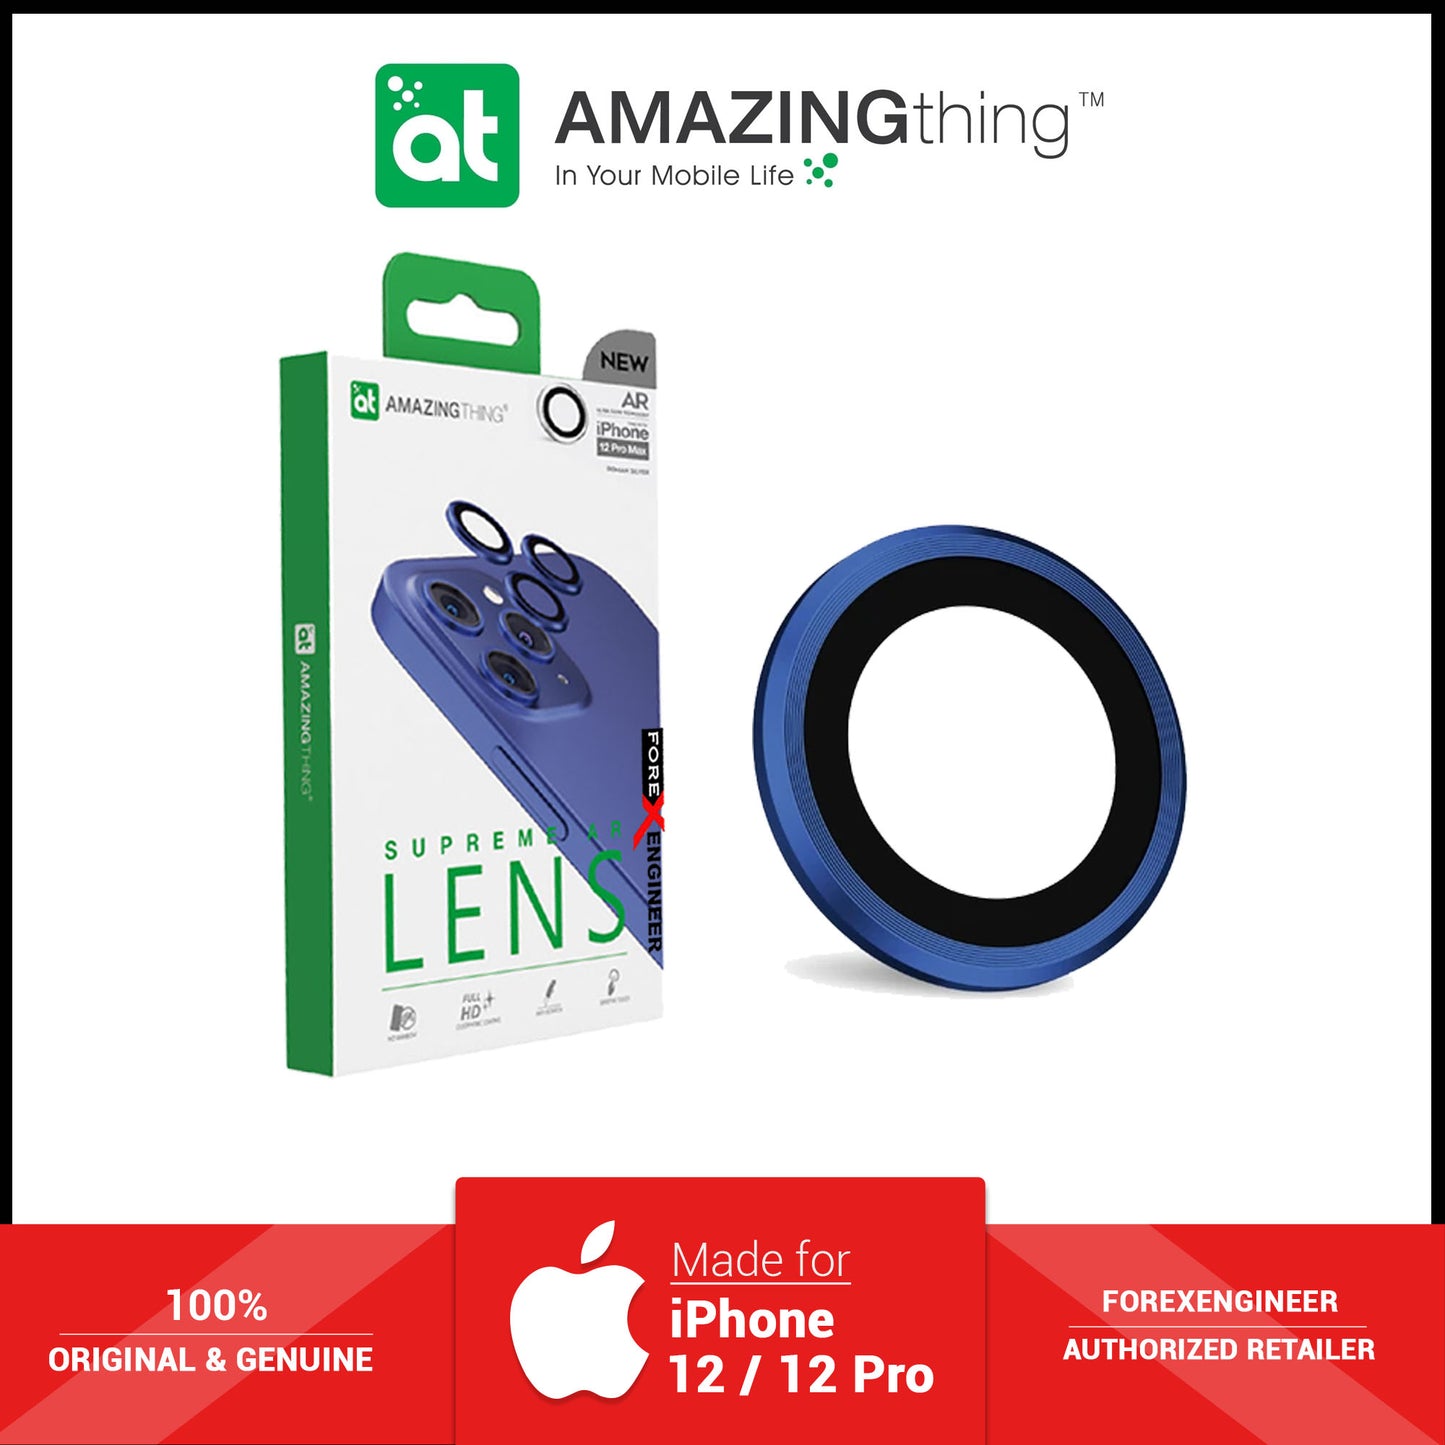 AmazingThing SUPREME AR 3D Lens Protector for iPhone 12 Pro - 3 pcs - Blue (Barcode: 4892878062947 )